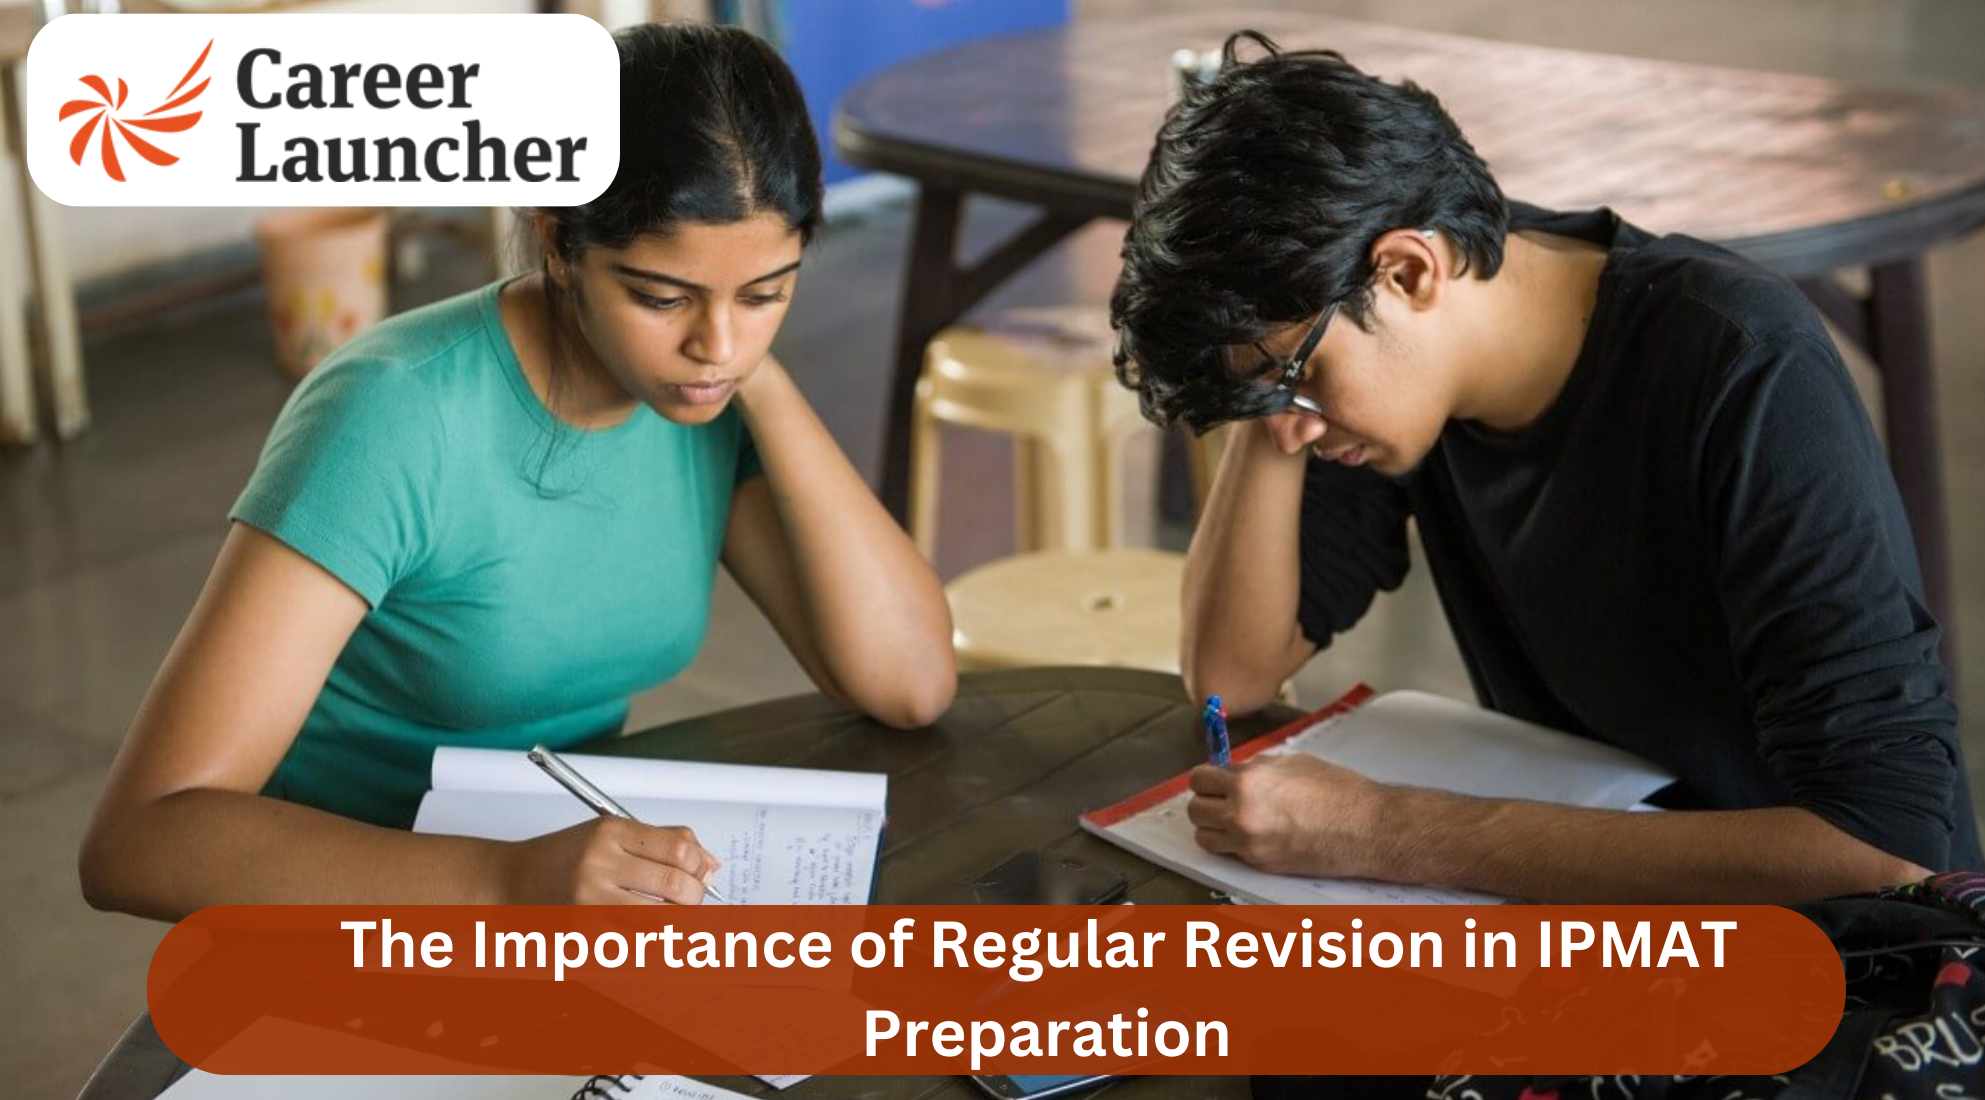 The Importance of Regular Revision in IPMAT Preparation